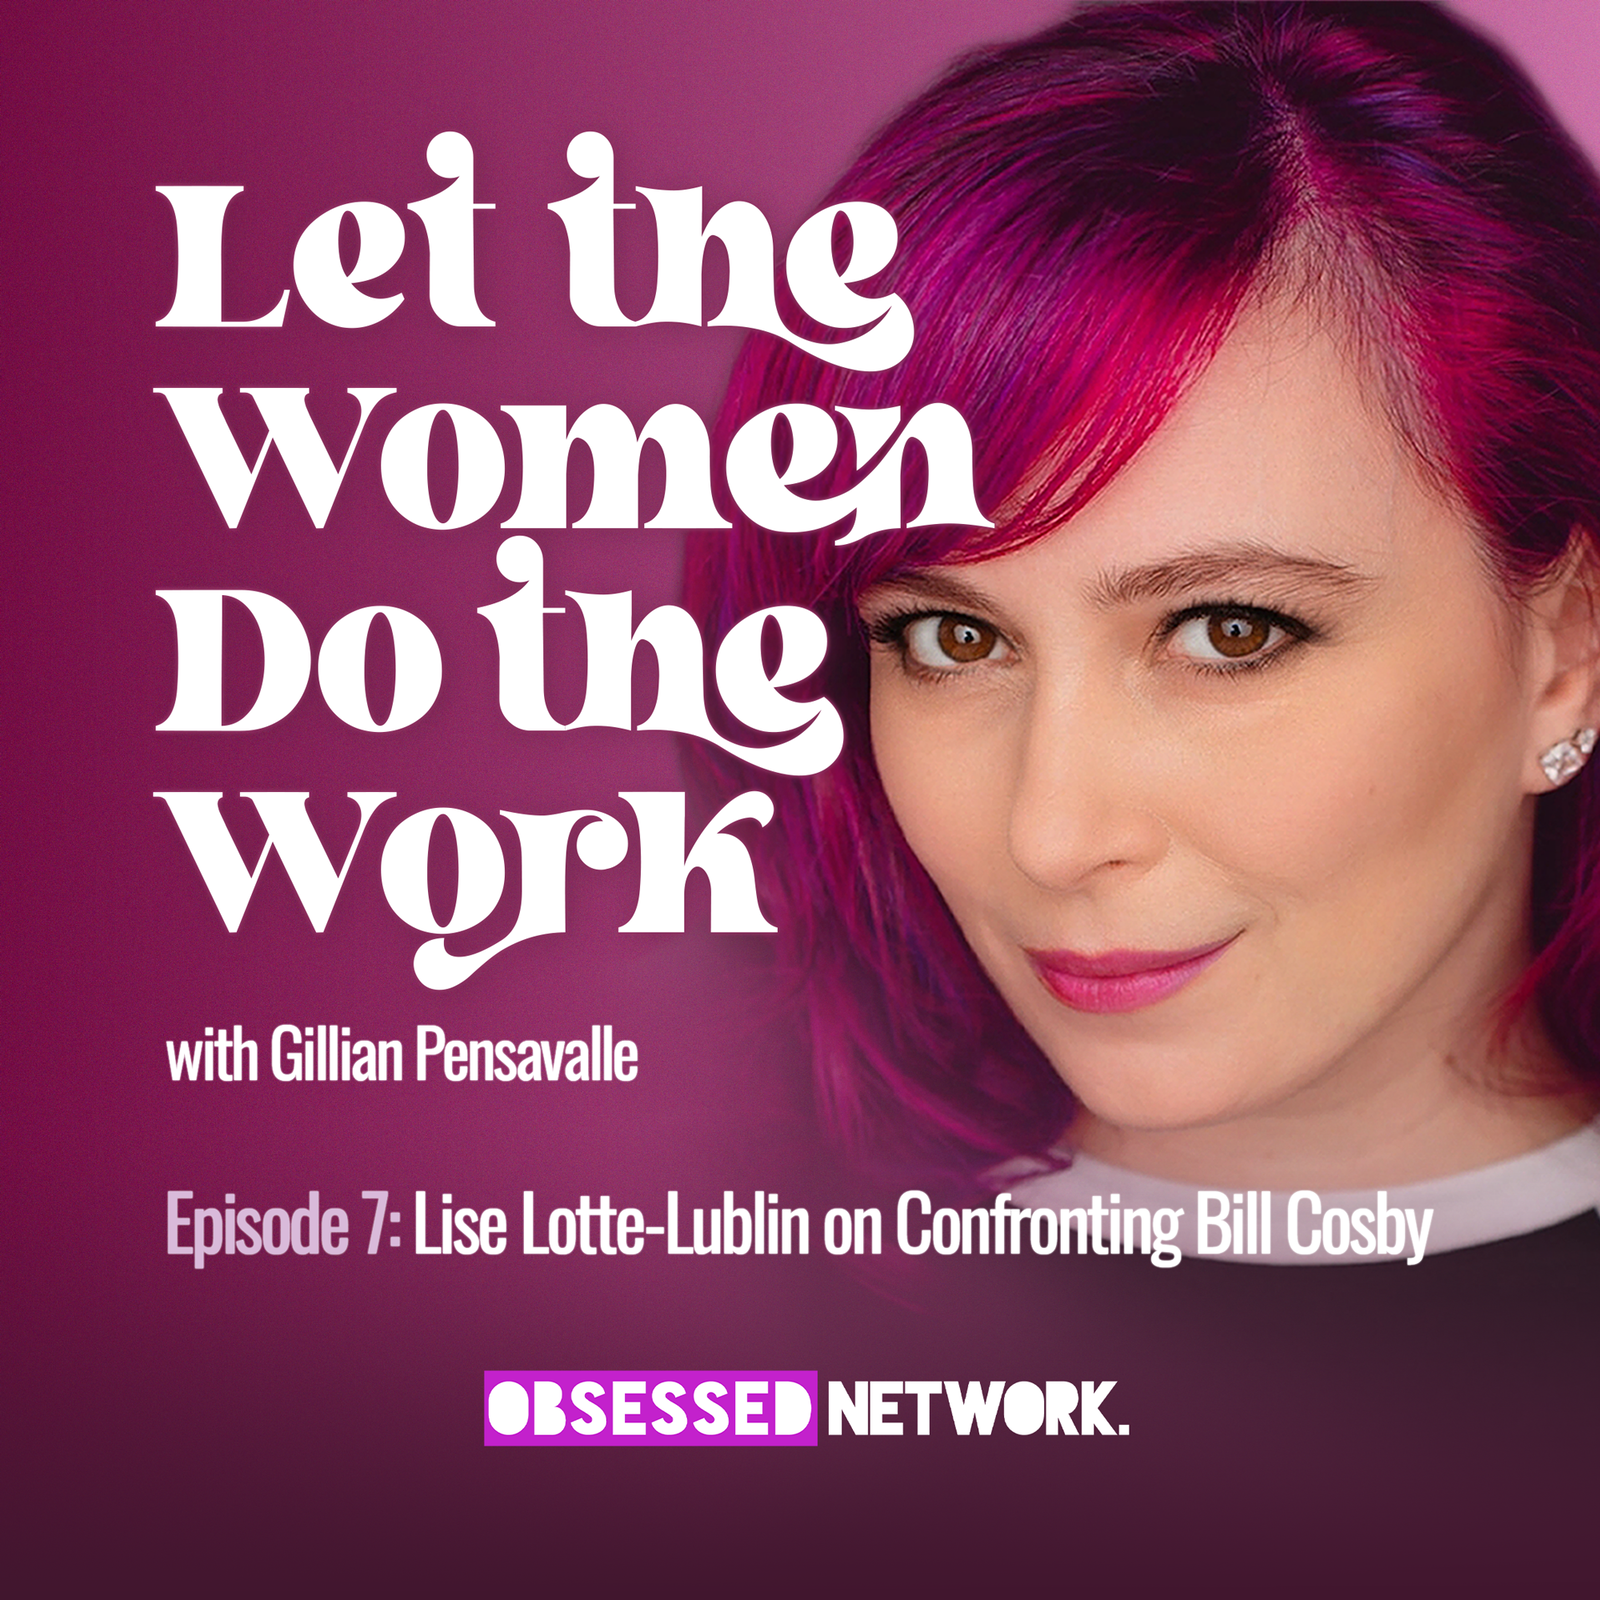 Let The Women: Lise Lotte-Lublin on Confronting Bill Cosby